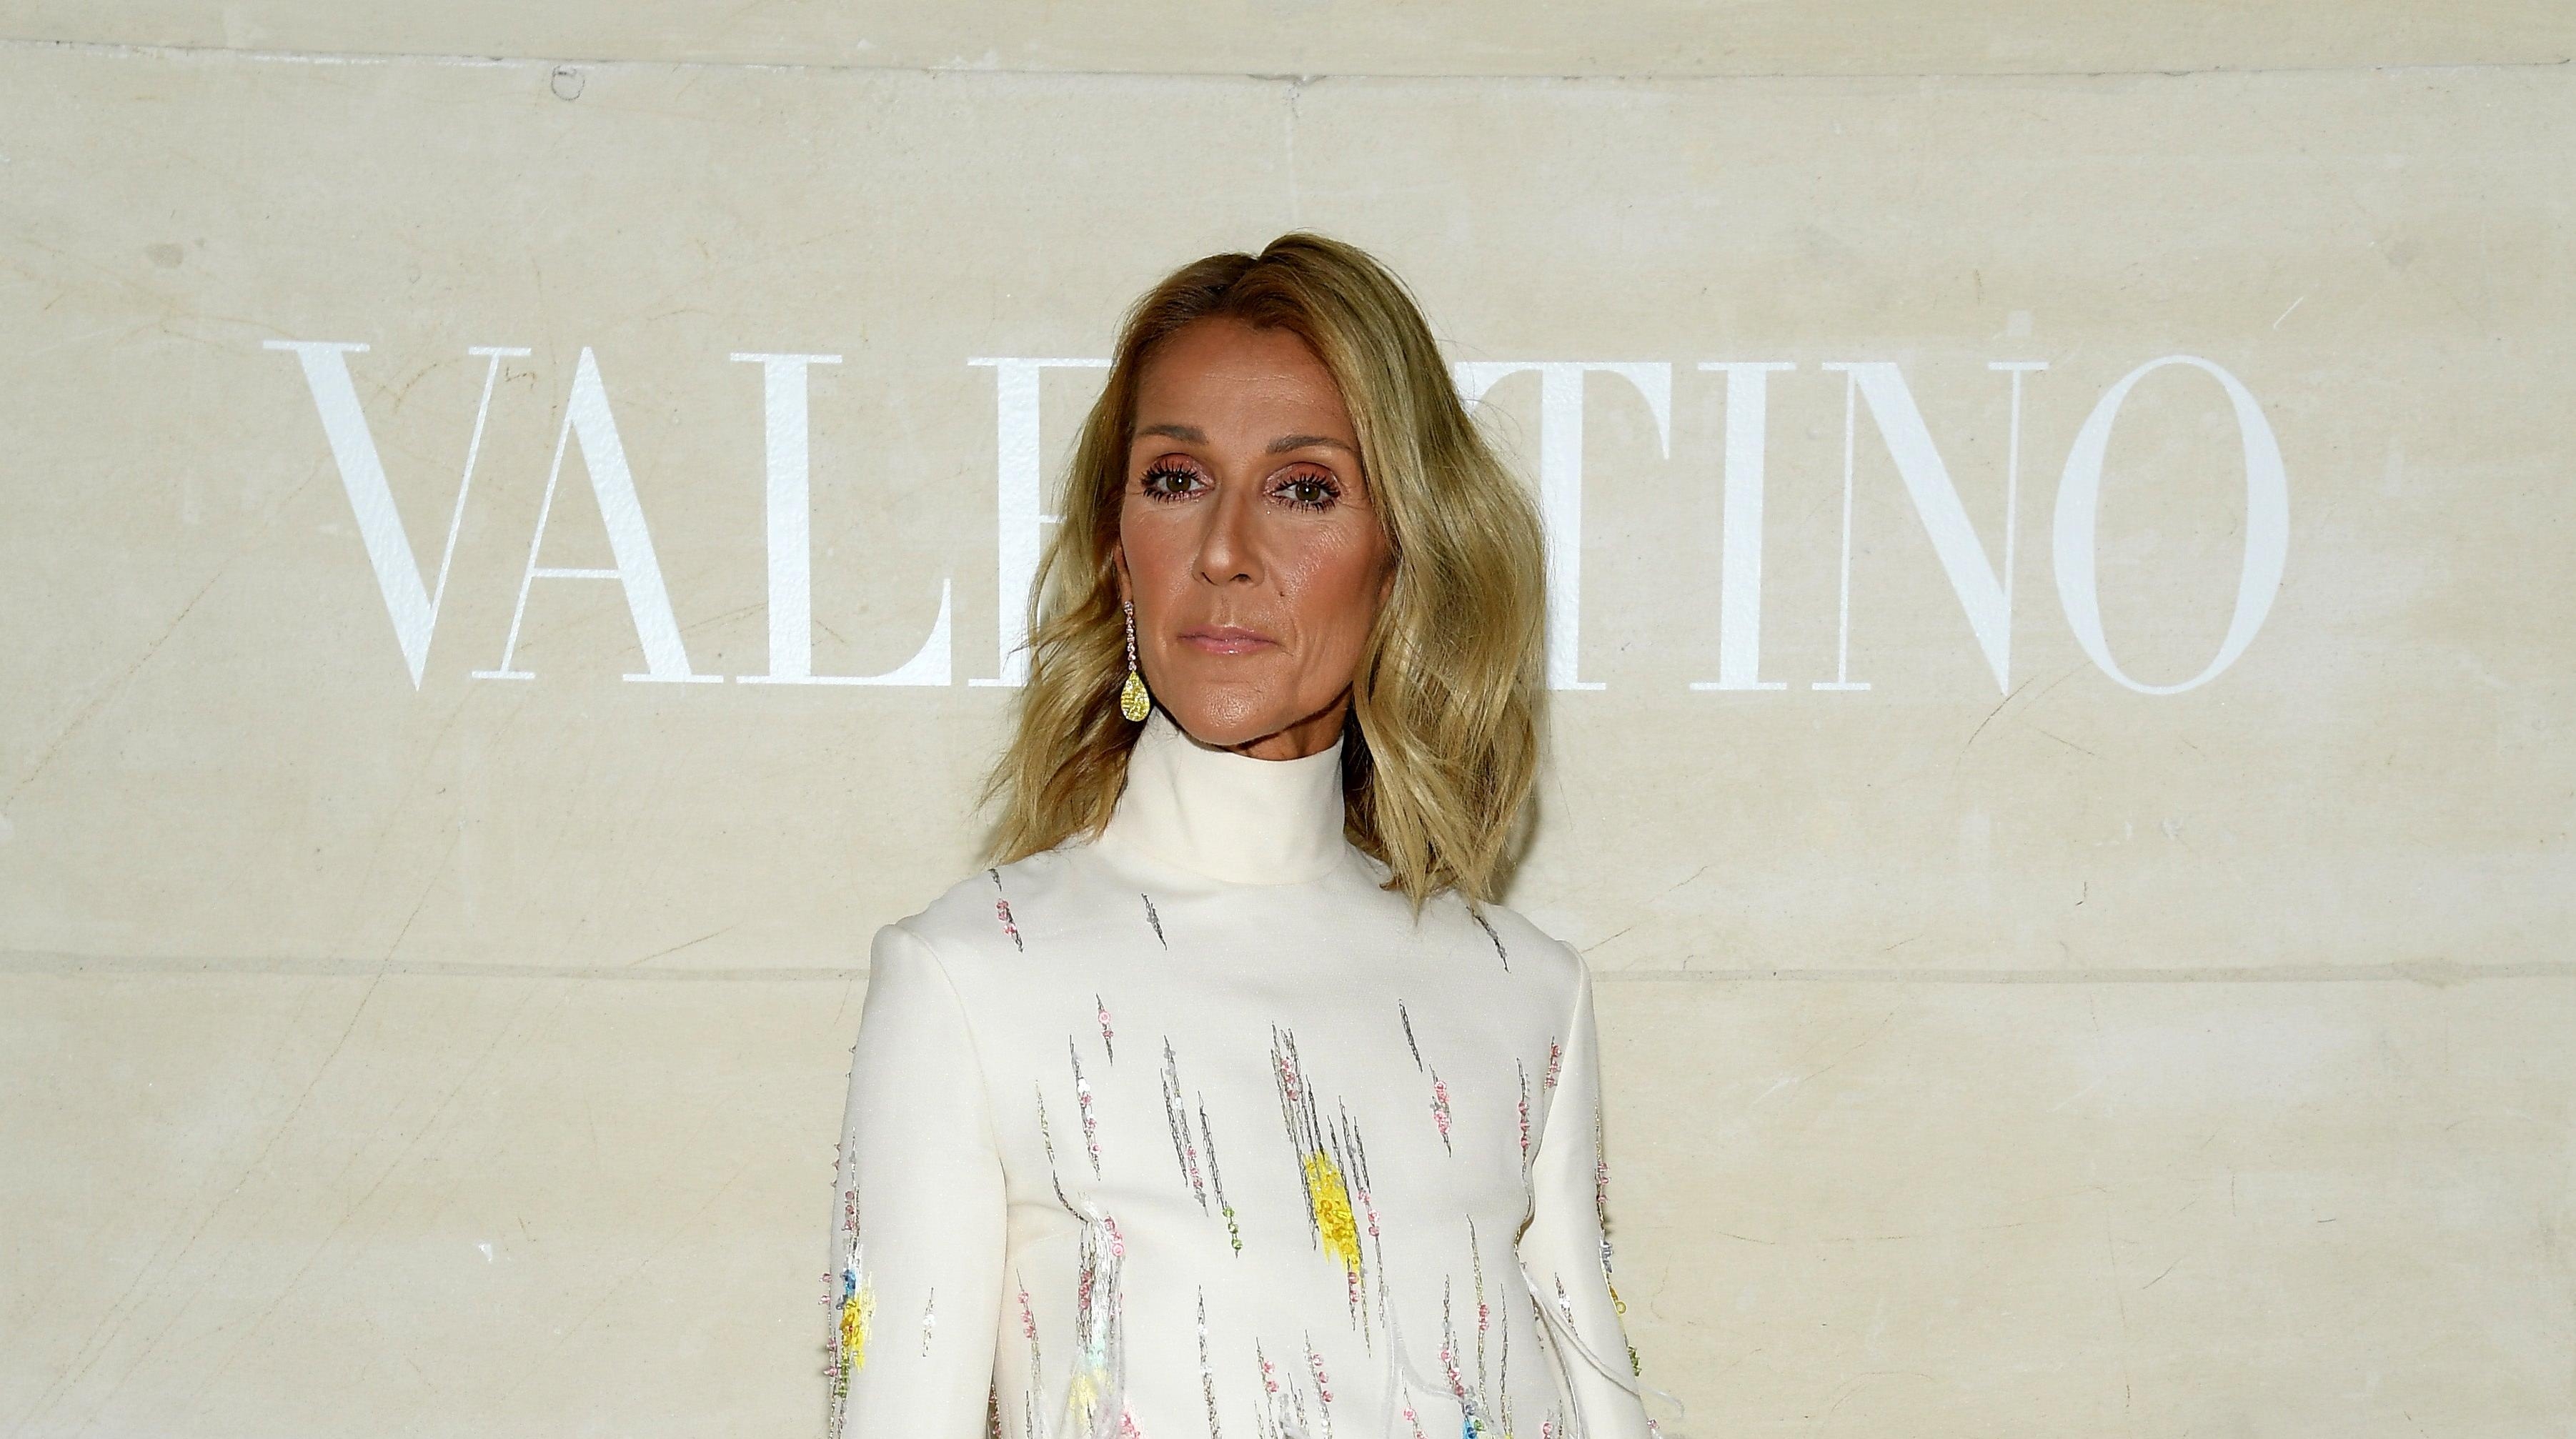 An official Celine Dion documentary is in the works, as opposed to that very unofficial biopic